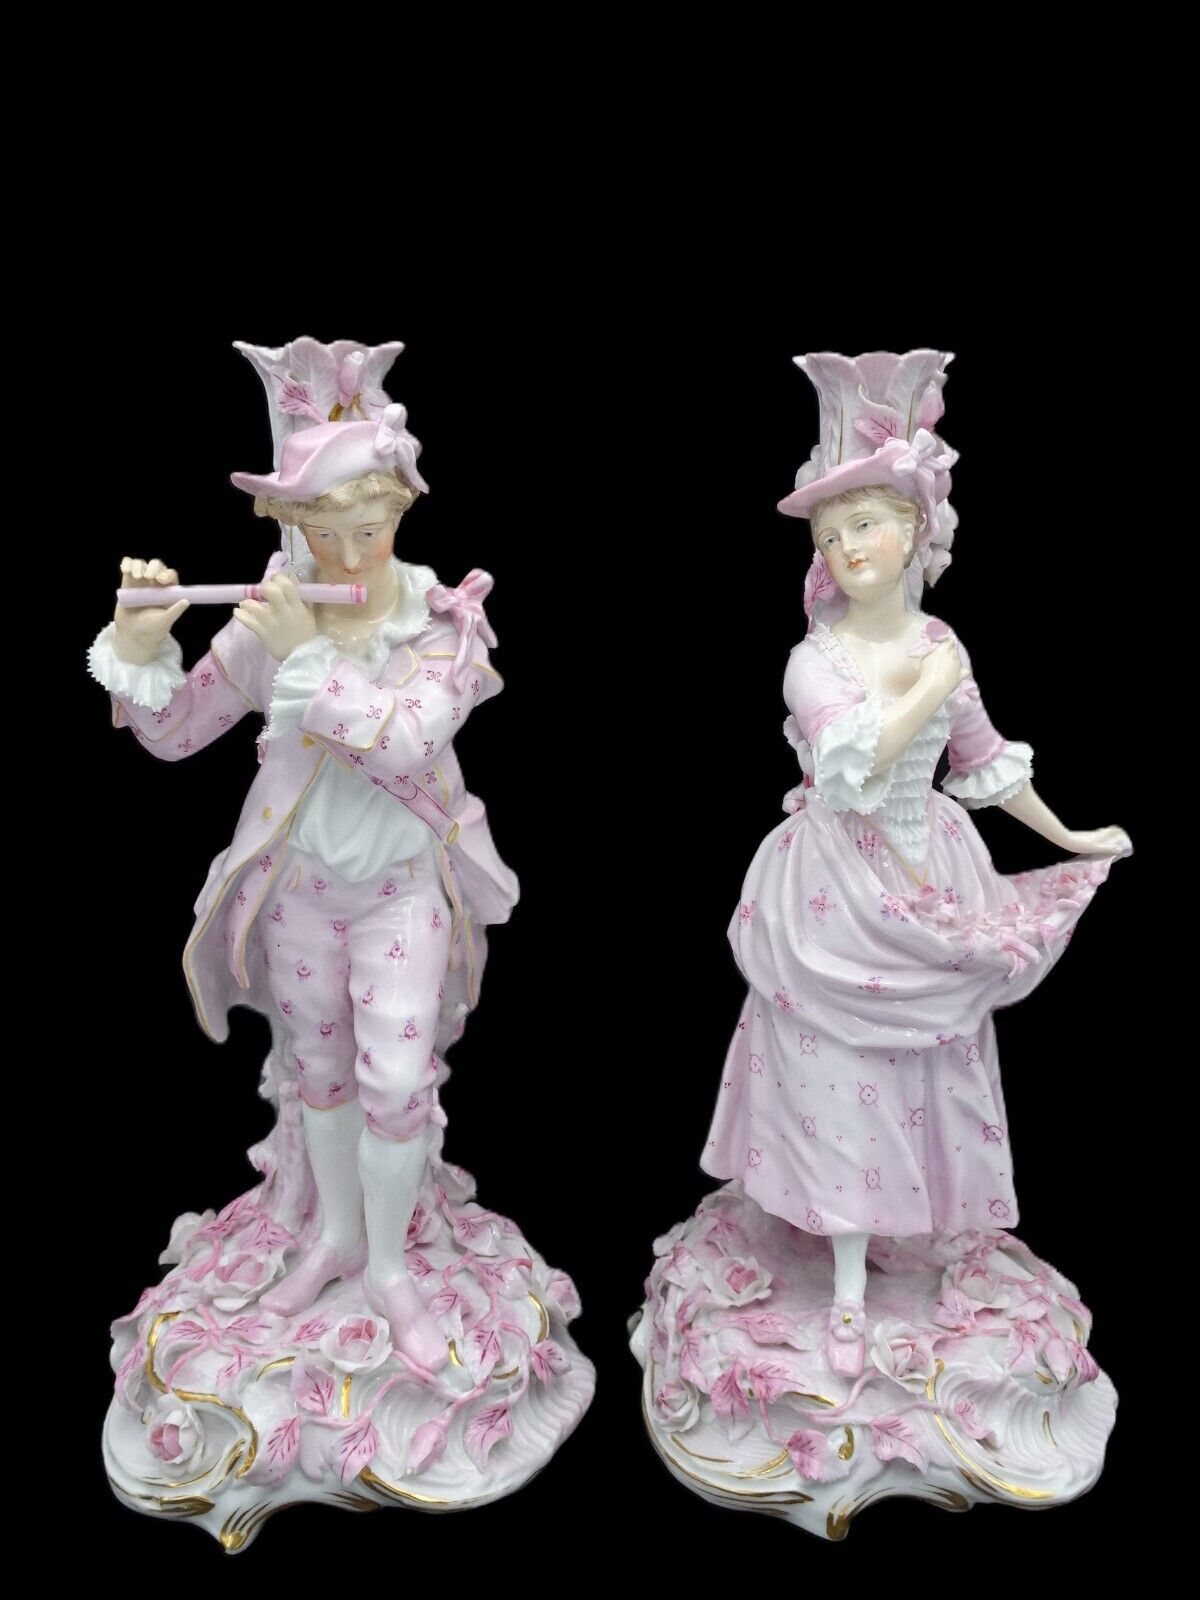 EXQUISITE PAIR OF EARLY SCHIERHOLZ GERMAN FIGURAL PINK WHITE CANDLESTICK HOLDERS